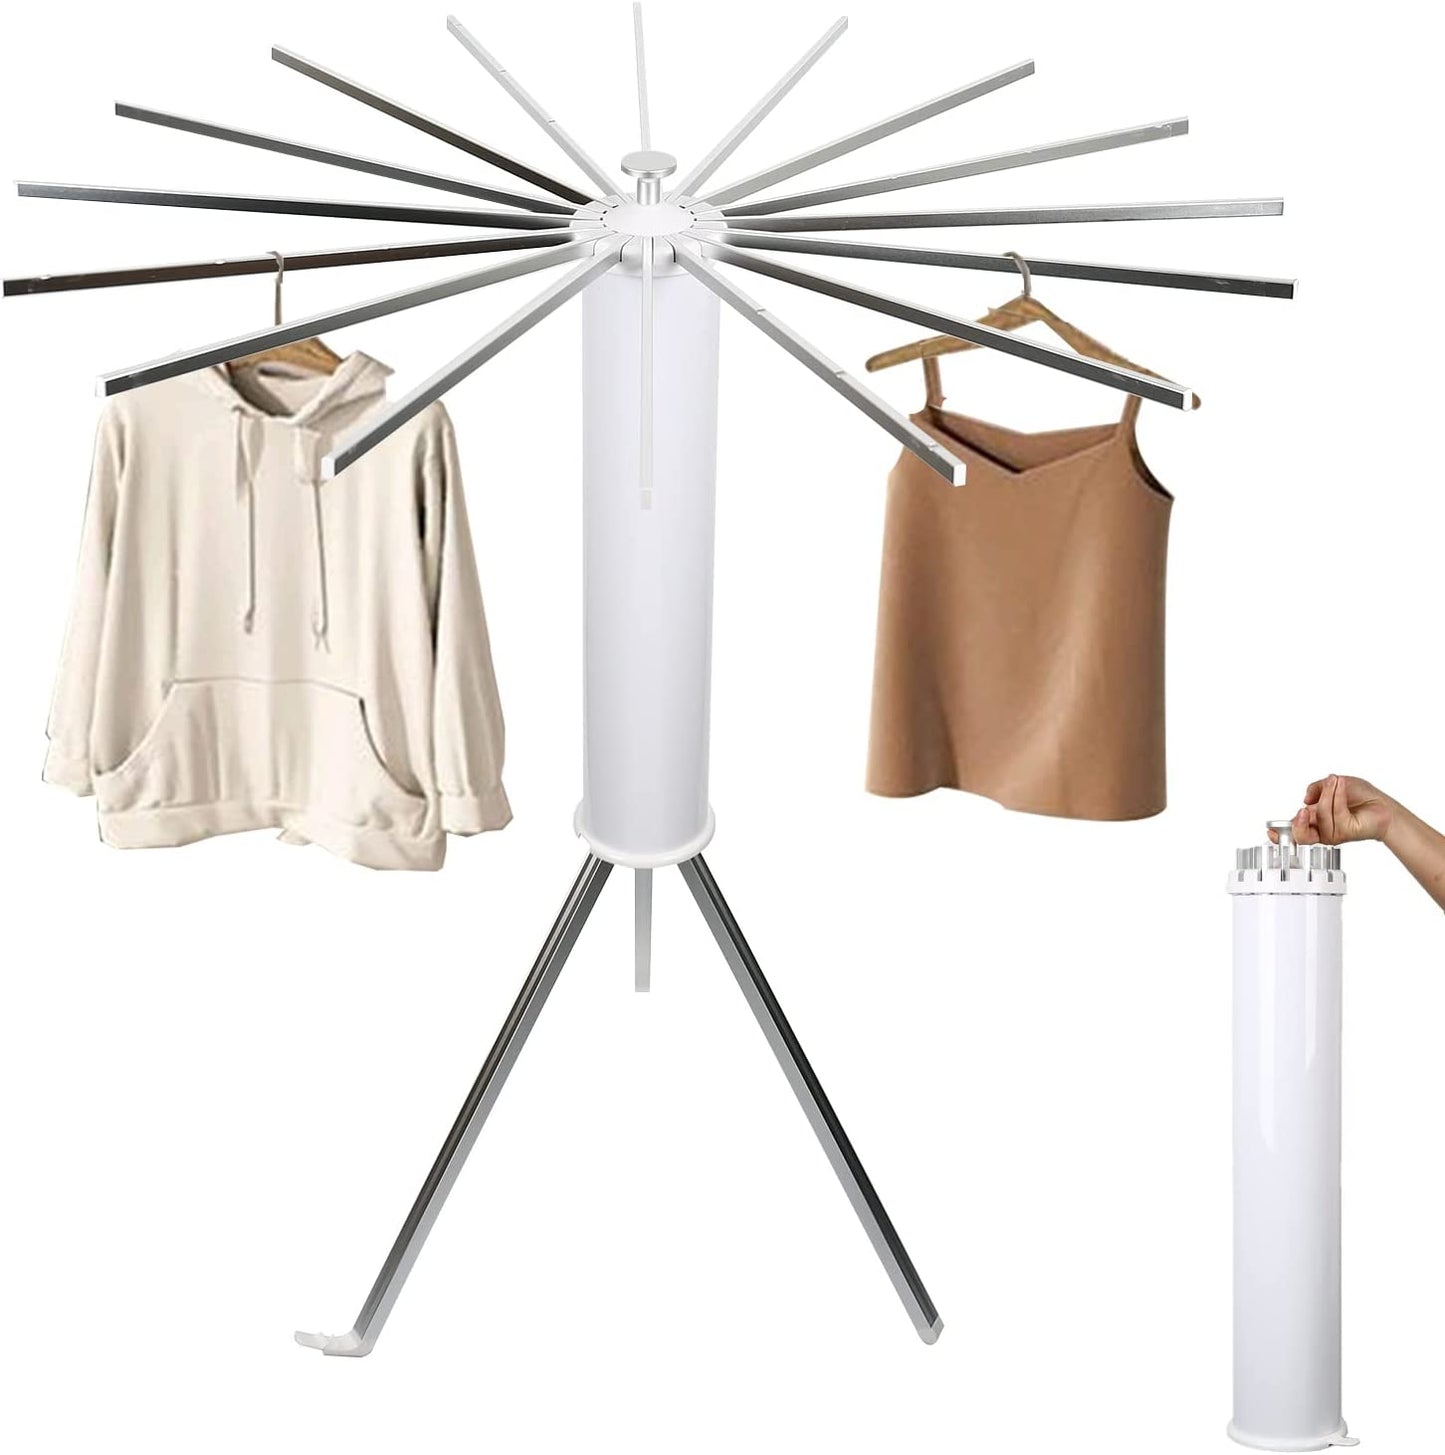 KiMy Homes Premium Aluminium Foldable Clothes Drying Stand with 16 Fol